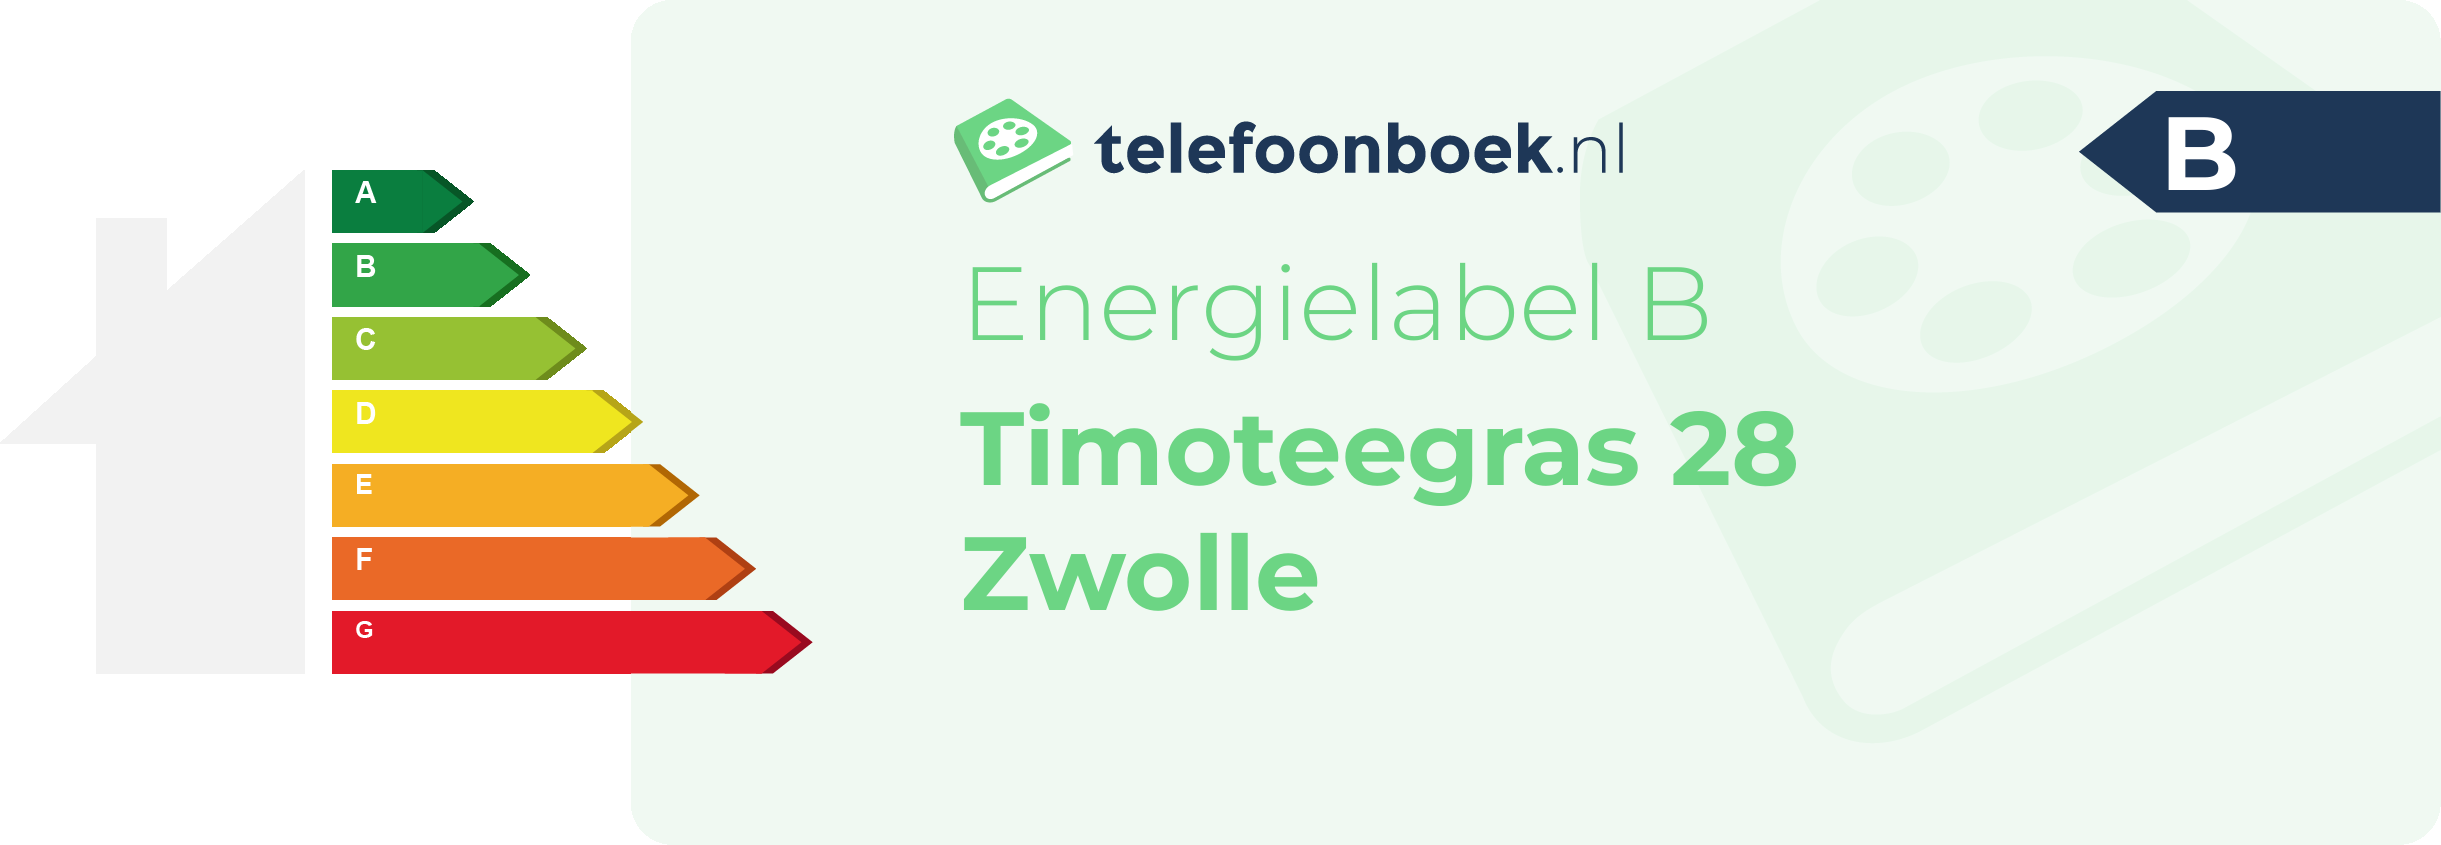 Energielabel Timoteegras 28 Zwolle